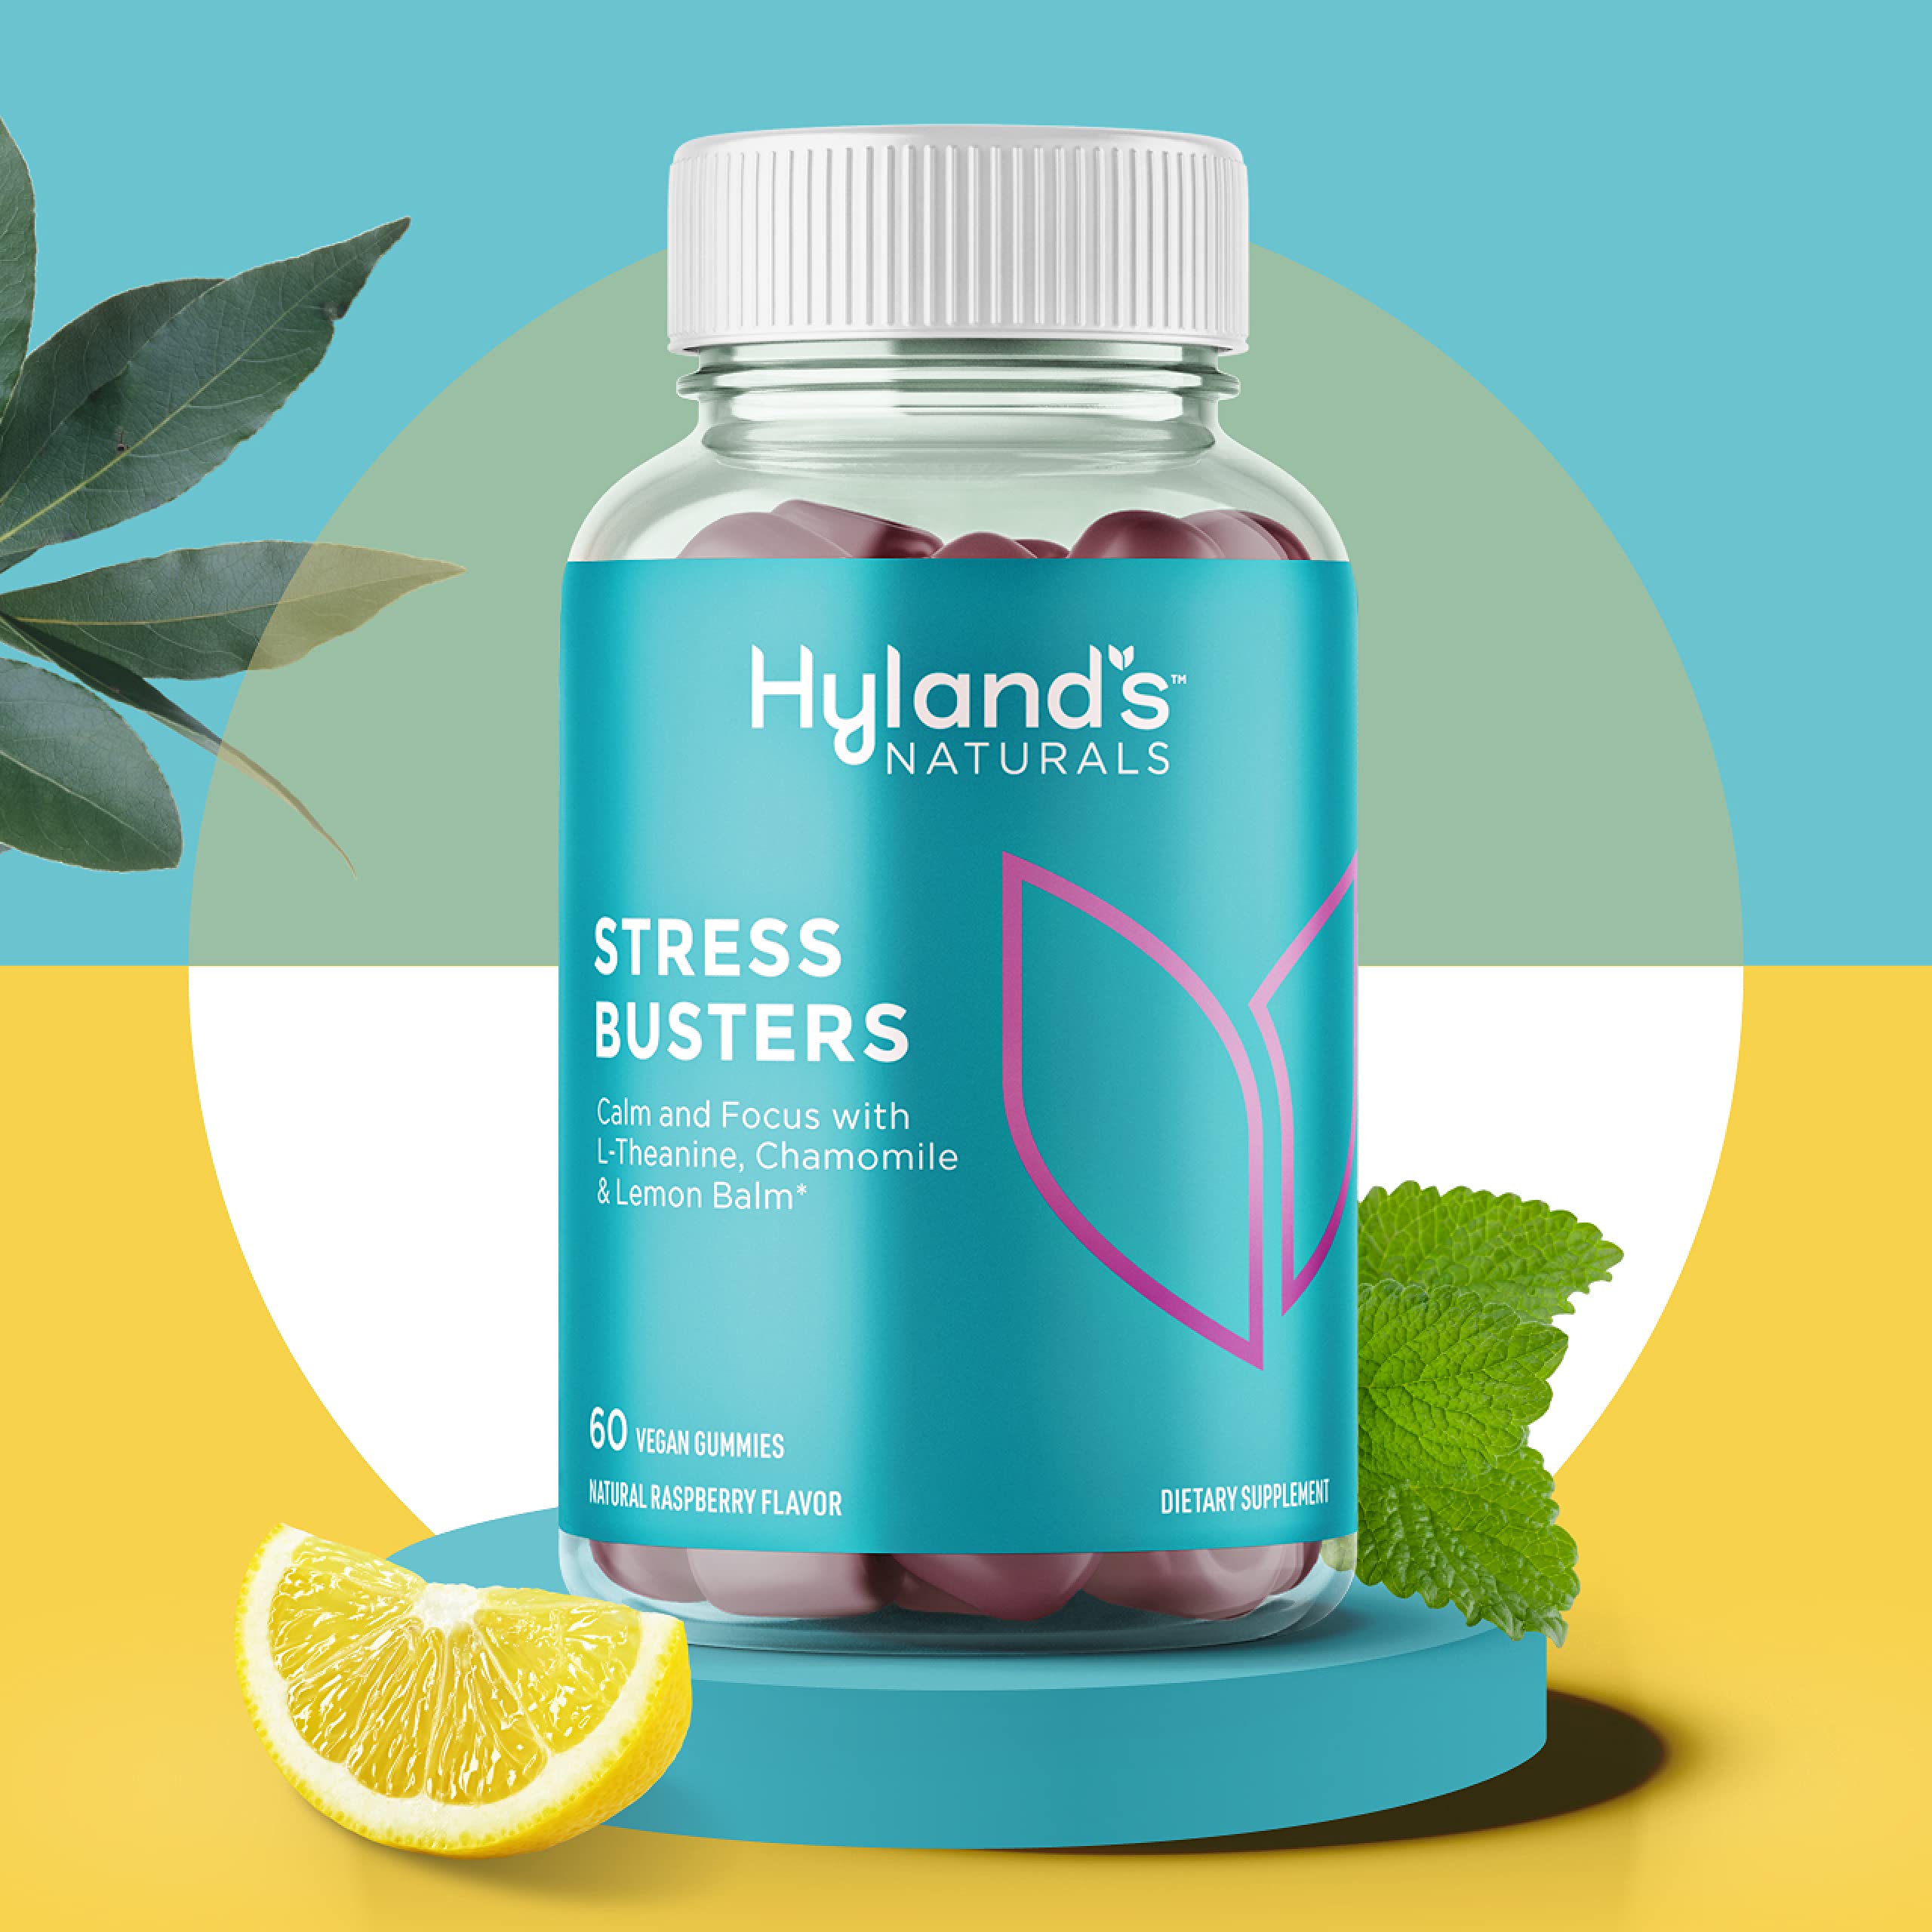 Hyland’s Naturals Stress Busters Gummies, Calm and Focus with L-Theanine, Chamomile and Lemon Balm, 60 Vegan Gummies (30 Days)